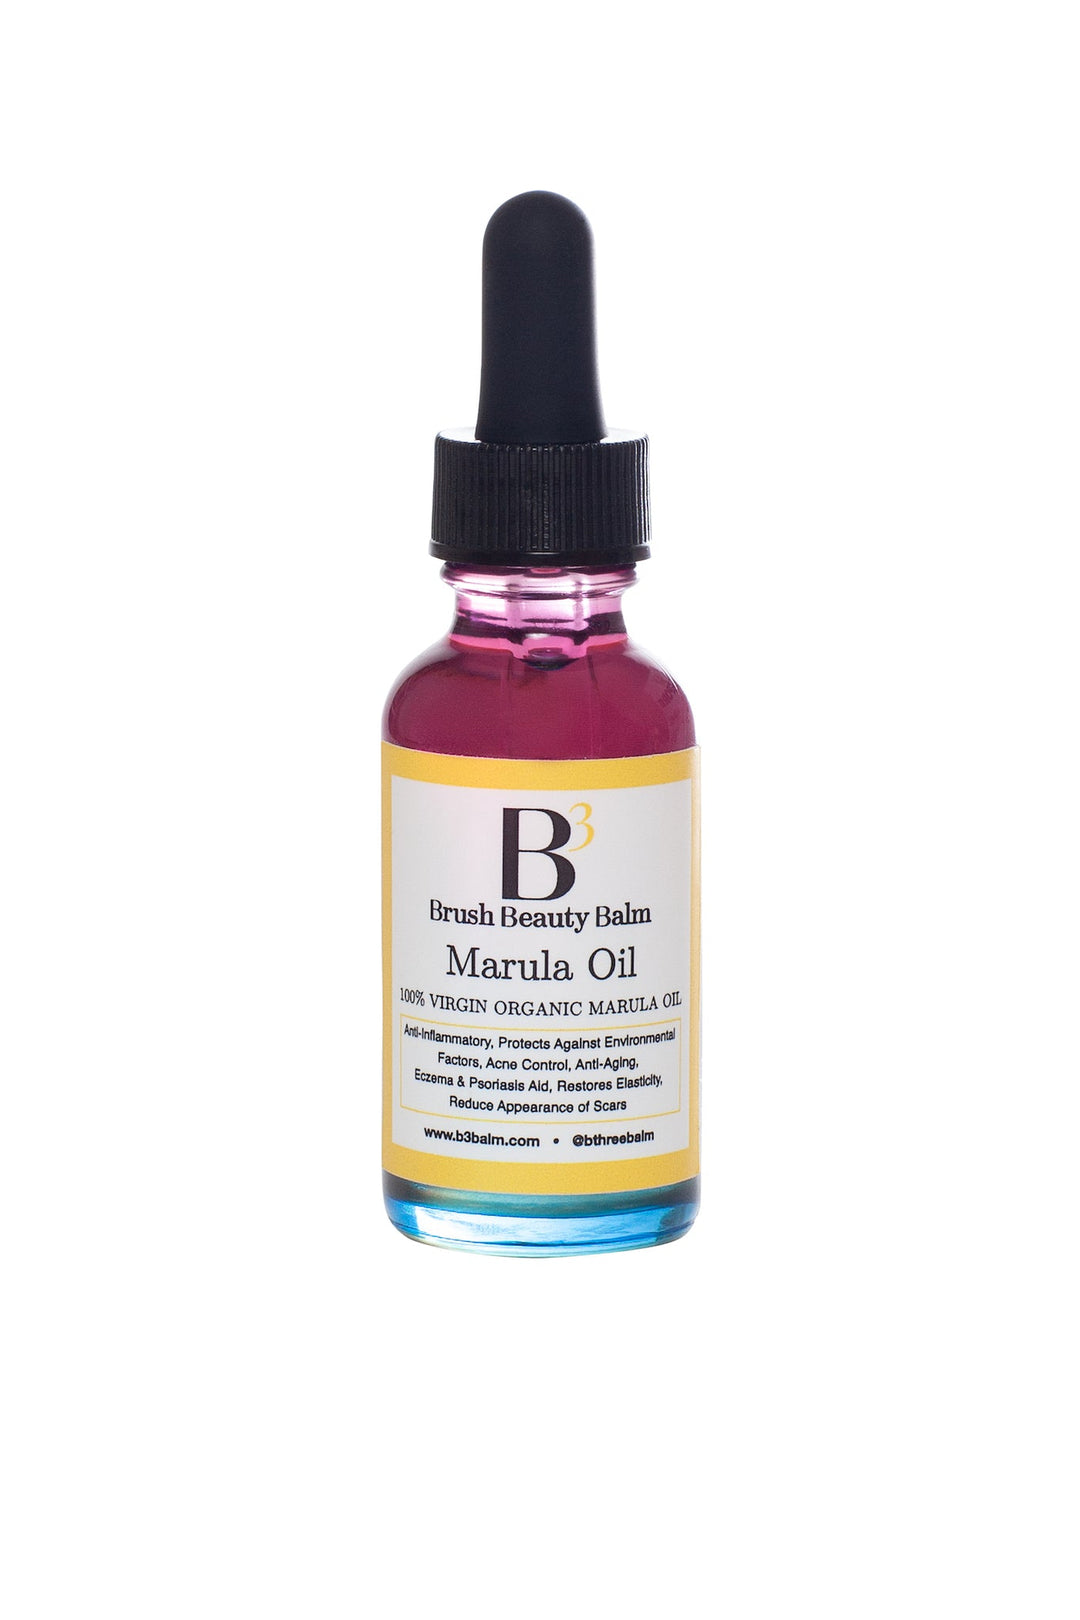 The Marula Facial Oil pink and blue glass bottle with white and yellow label that includes what it is used for